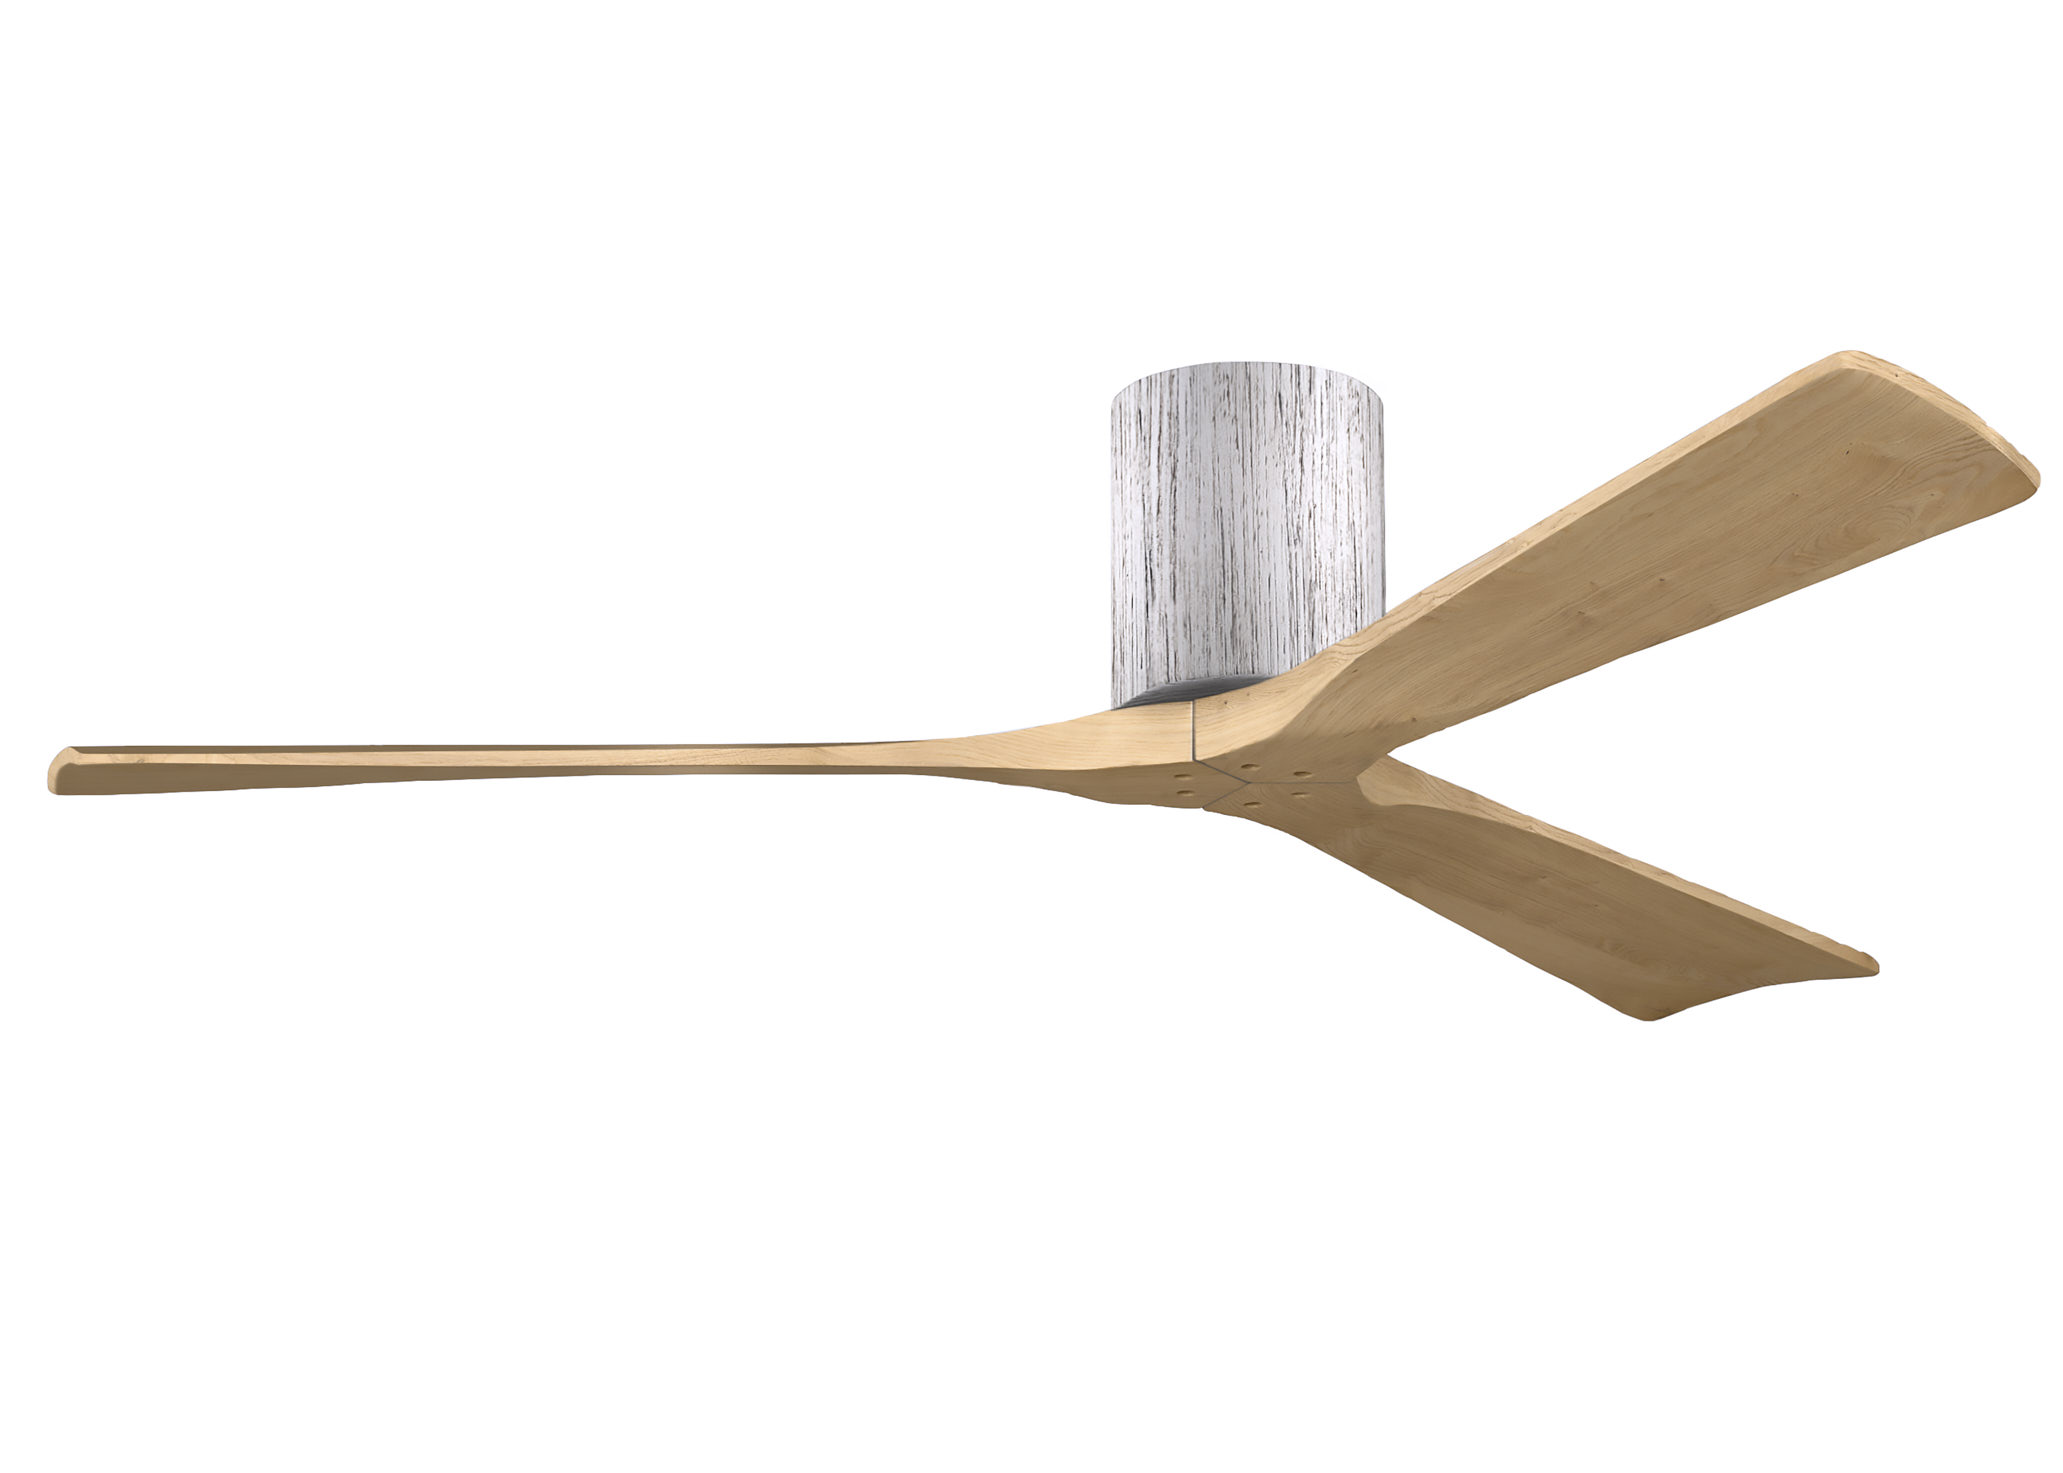 Irene-3H 6-speed ceiling fan in barn wood finish with 60